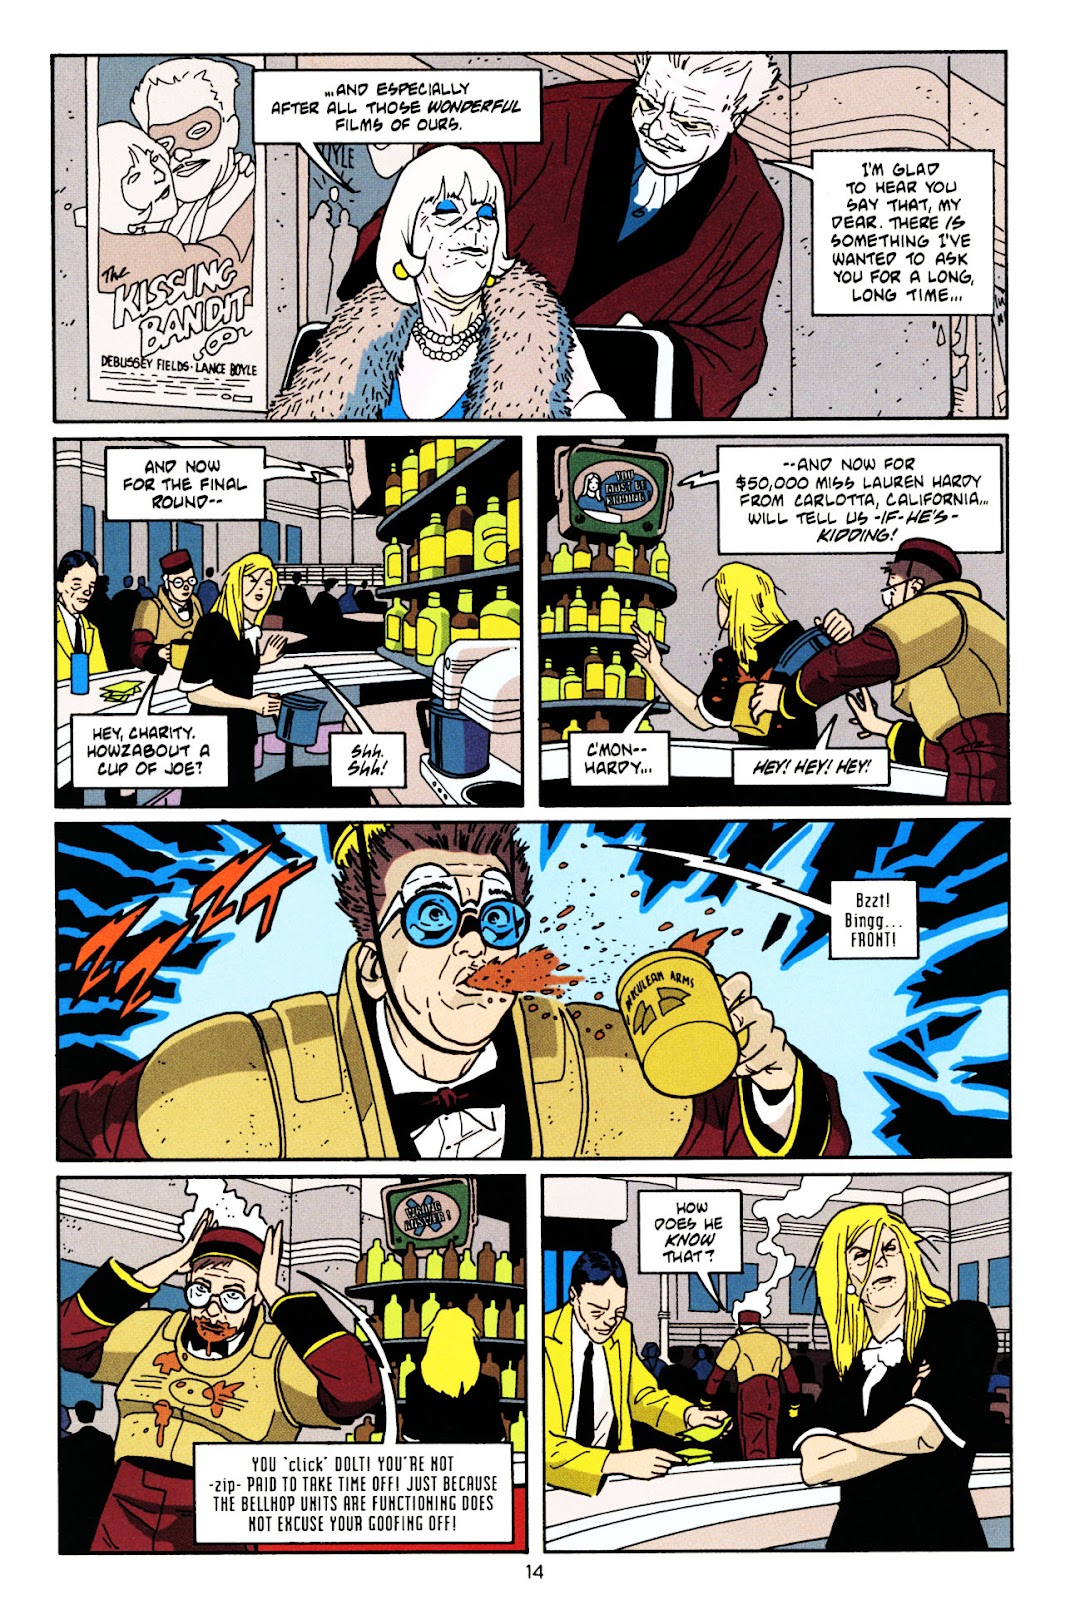 Terminal City: Aerial Graffiti issue 1 - Page 15